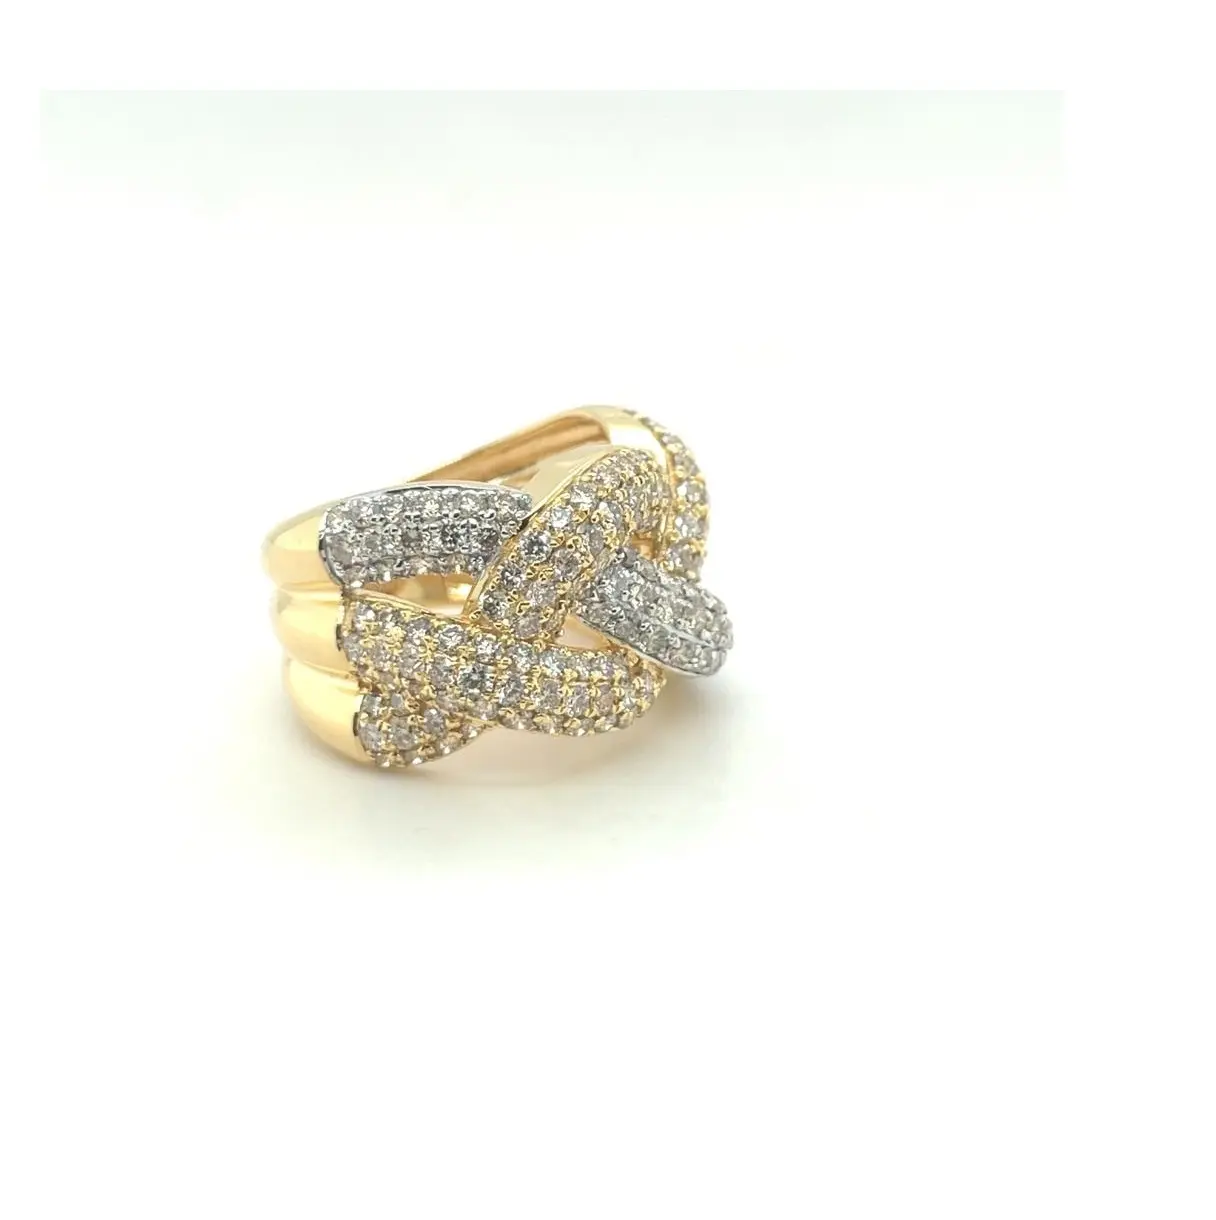 Hot Sale Handmade Two Tone 14 Kt Real Diamond Finger Ring with 2.25 Diamond Ct for Girls Engagement Ring for Export